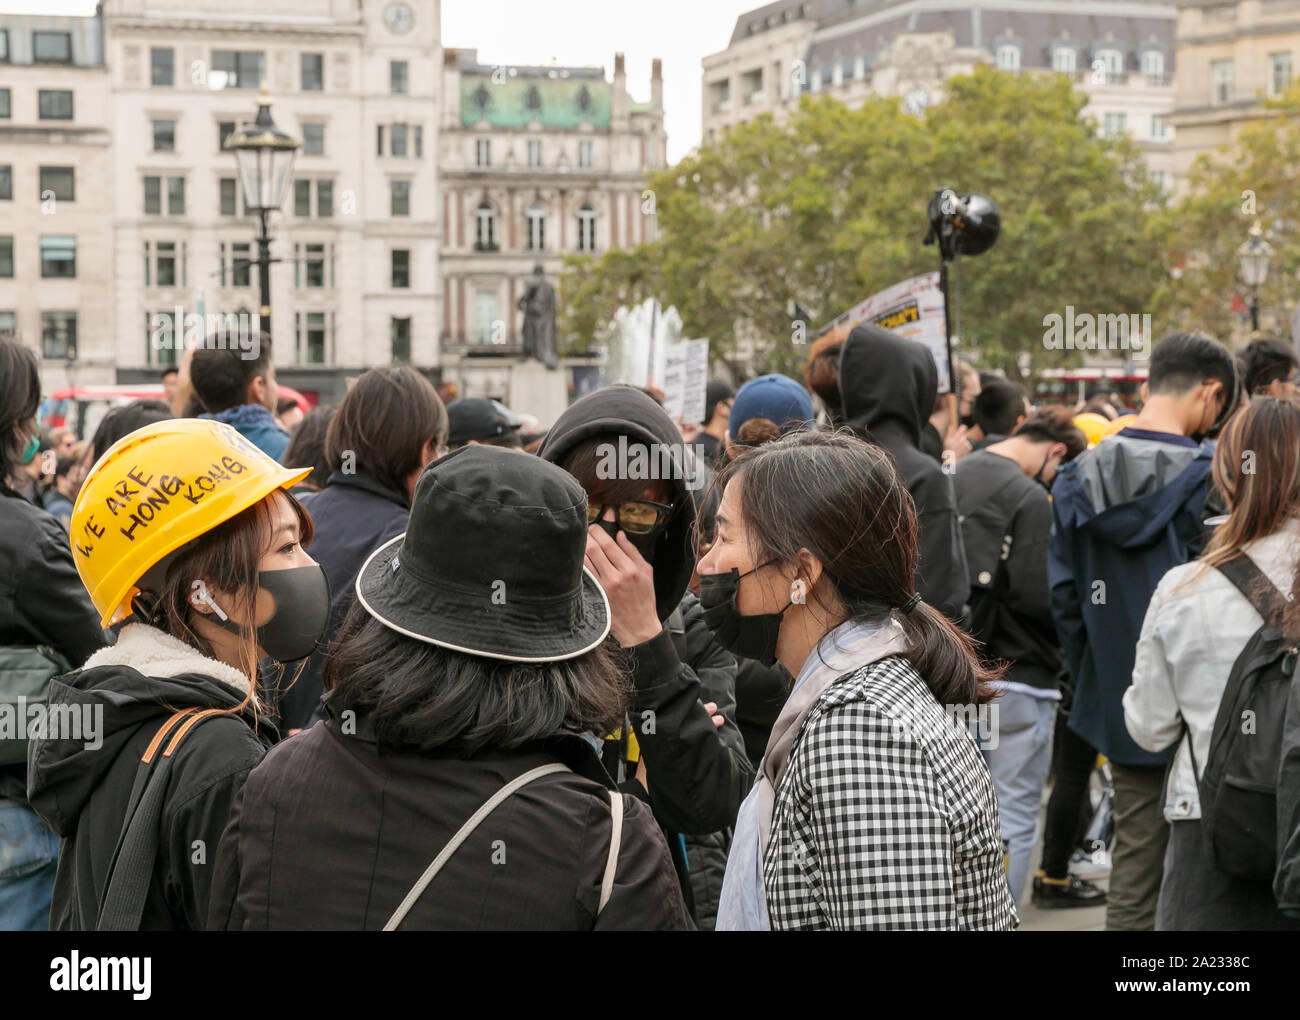 Protestor wearing face mask and yellow hard hat bearing the words 'We are Hong Kong' at demonstration against Chinese rule in Hong Kong, Trafalgar Square, London, 28th September 2019. Hundreds pf people gather after marching from the chinese consulate Stock Photo